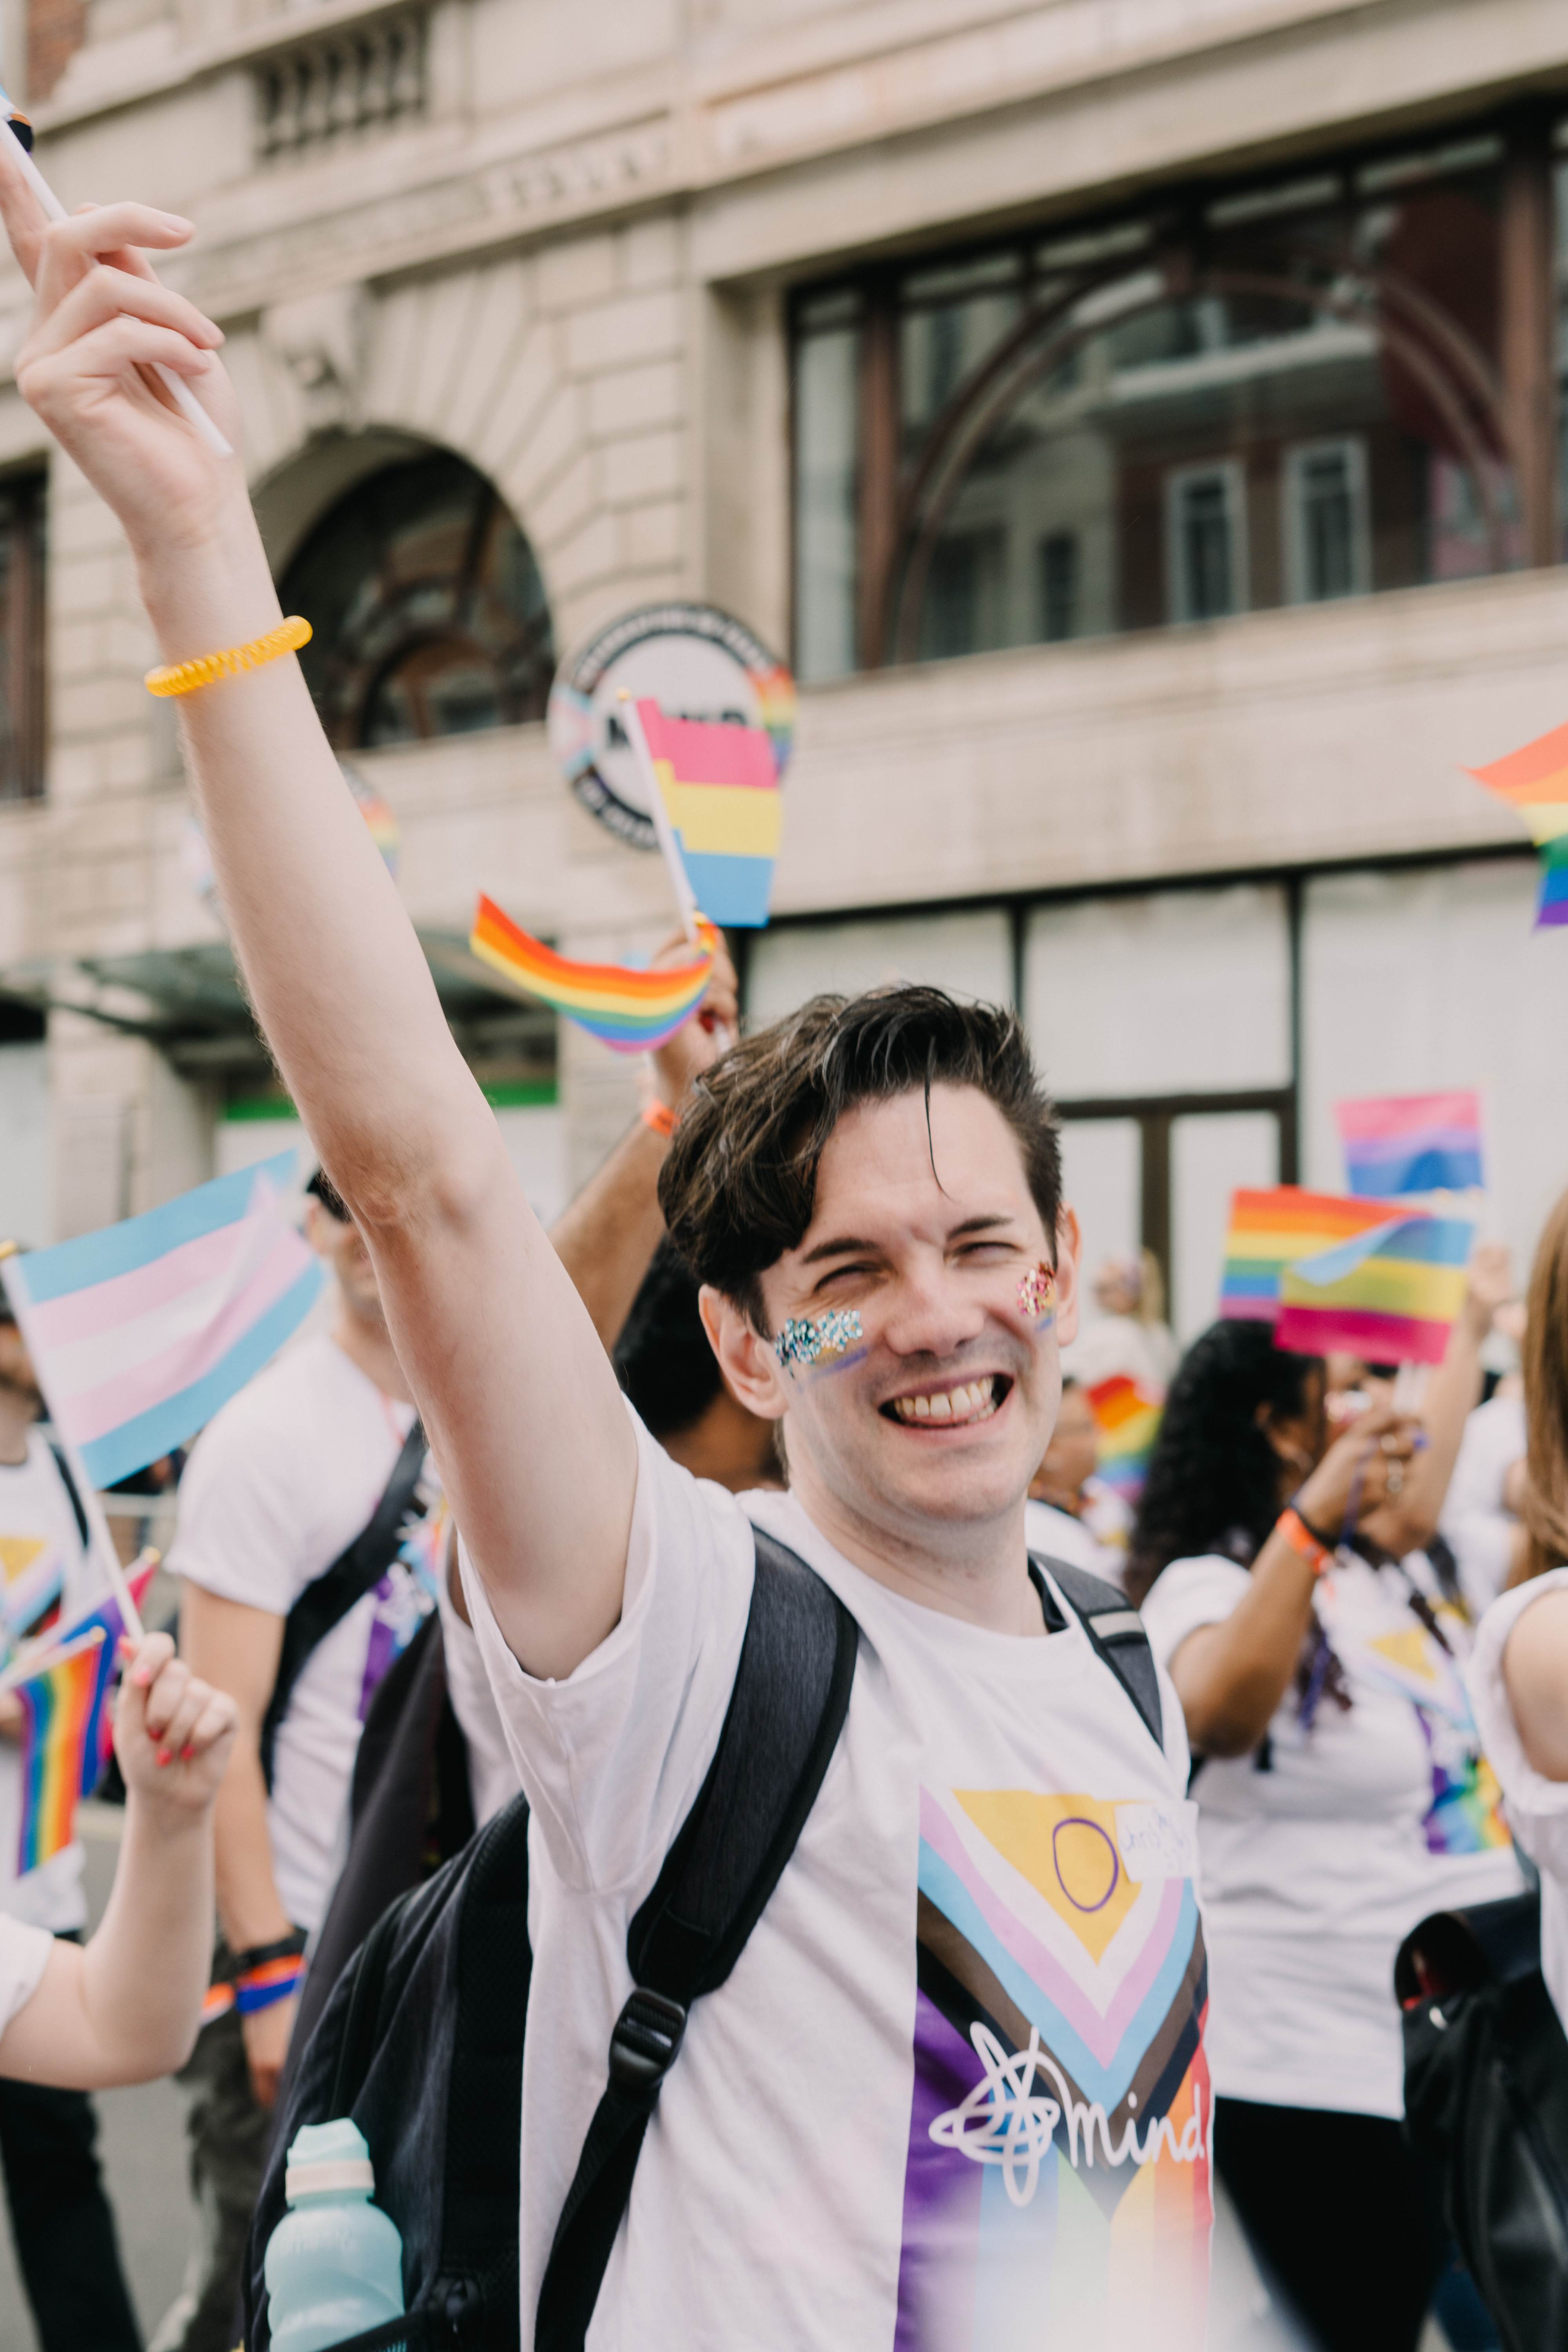 Chris at London Pride march smiling with Mind Pride flag tshirt